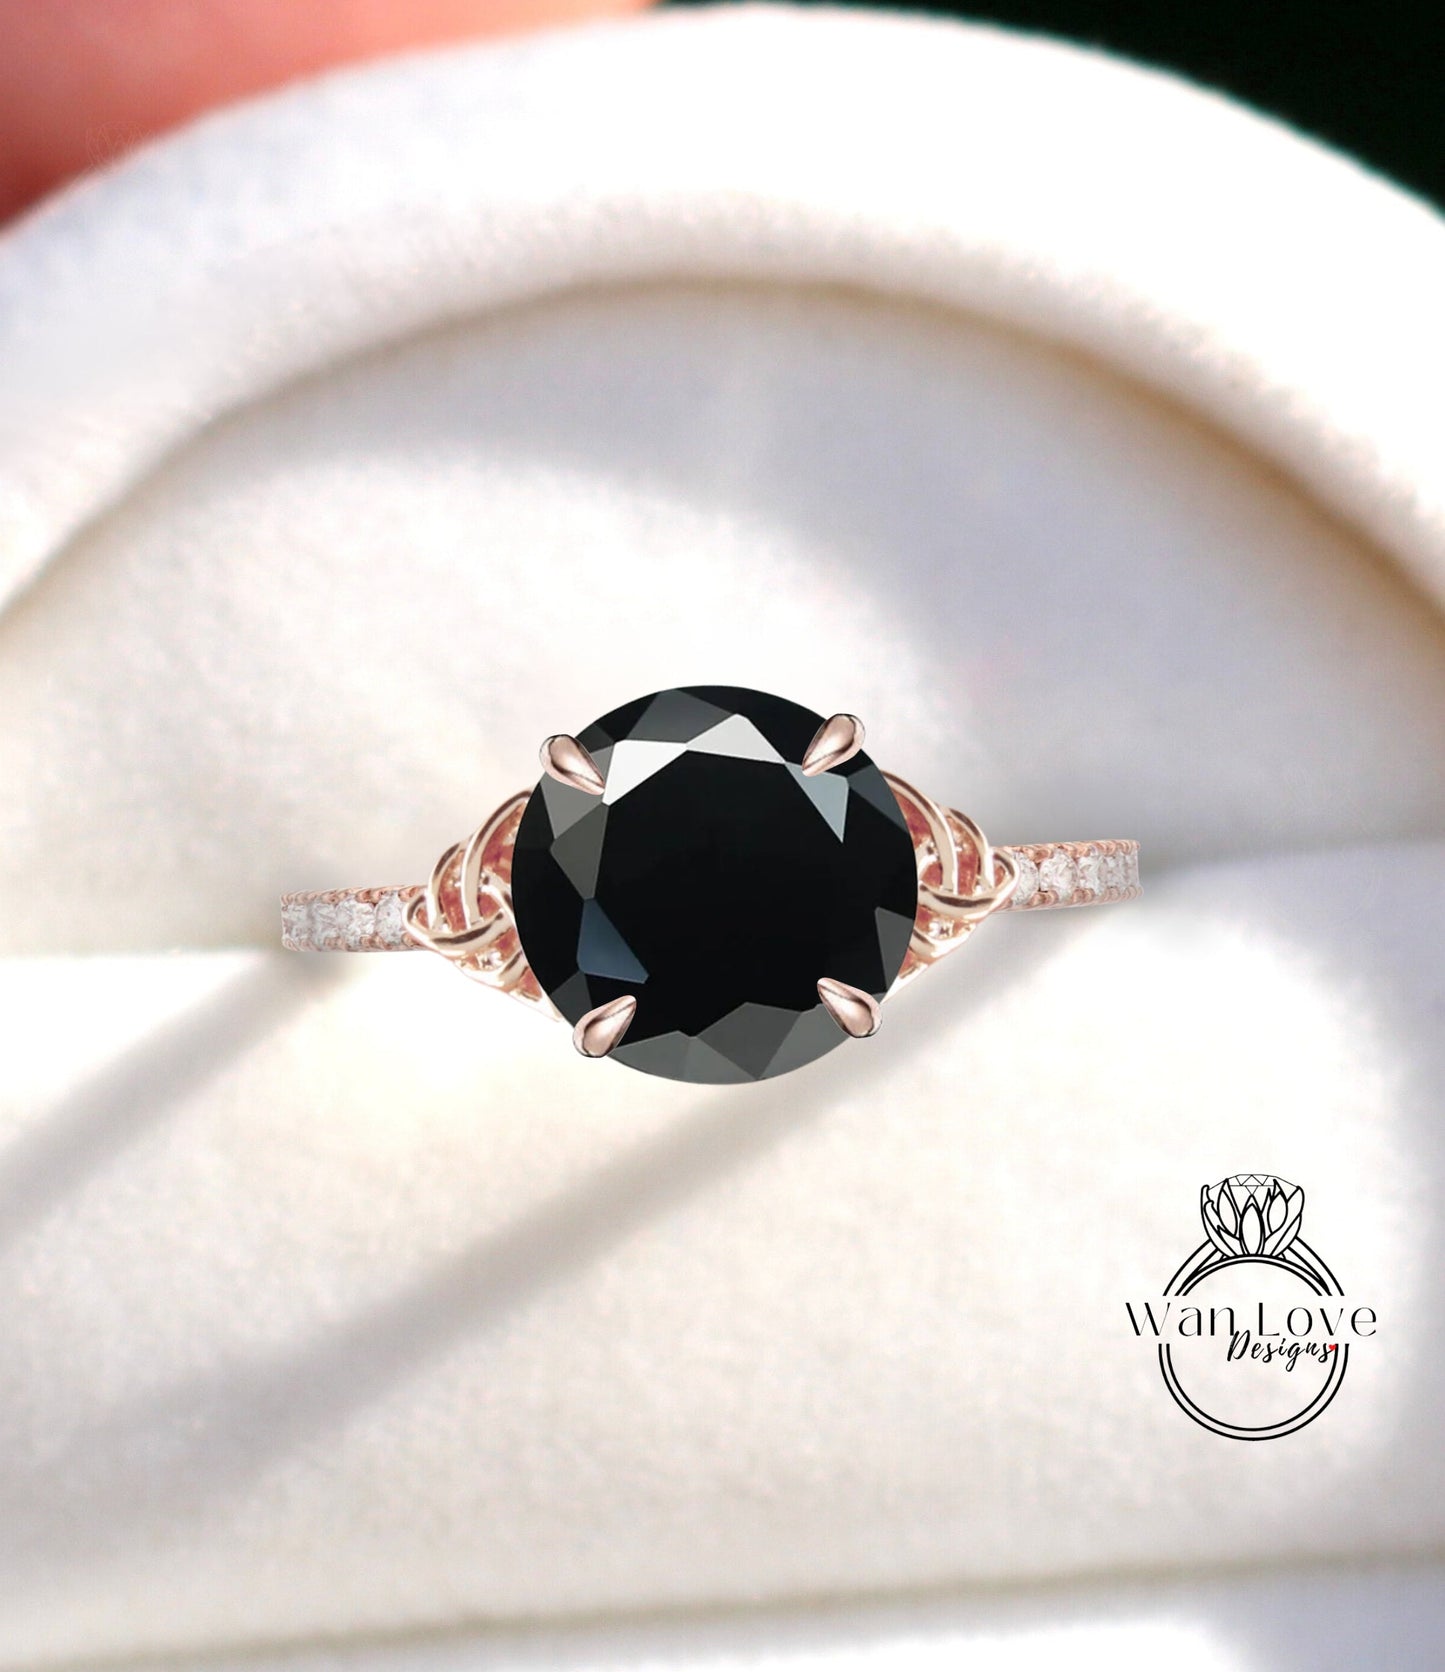 Celtic Round Black Spinel engagement ring white gold half eternity band Celtic diamond wedding bridal ring Unique Anniversary Promise ring Wan Love Designs